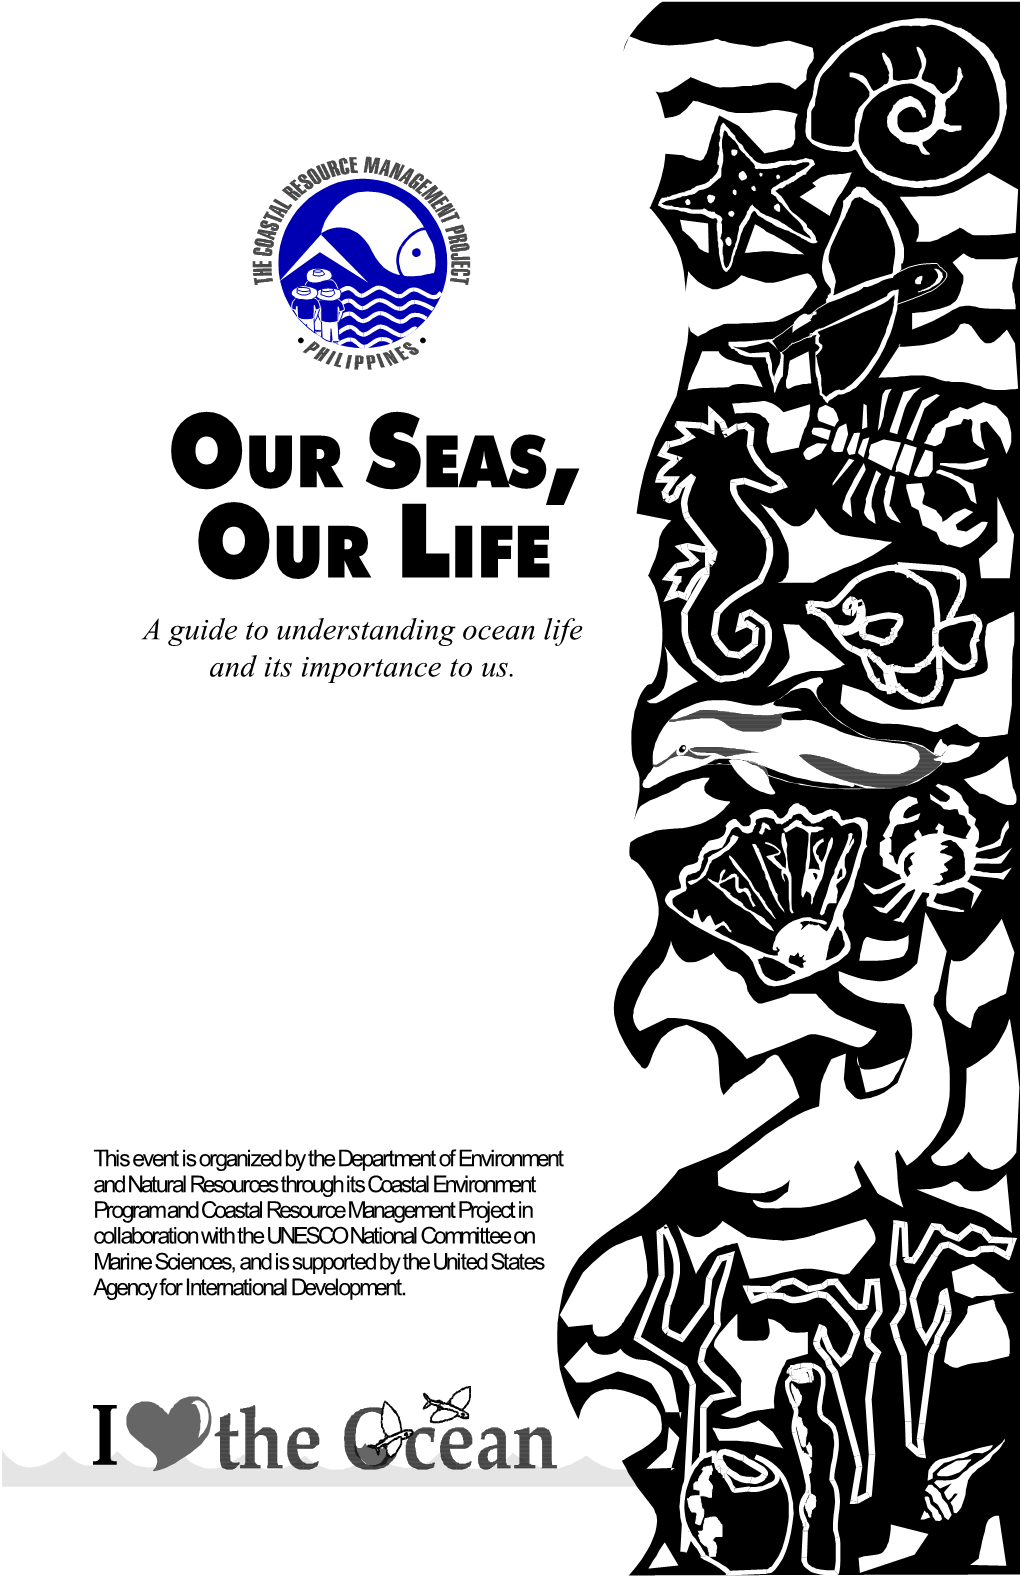 OUR SEAS, OUR LIFE a Guide to Understanding Ocean Life and Its Importance to Us